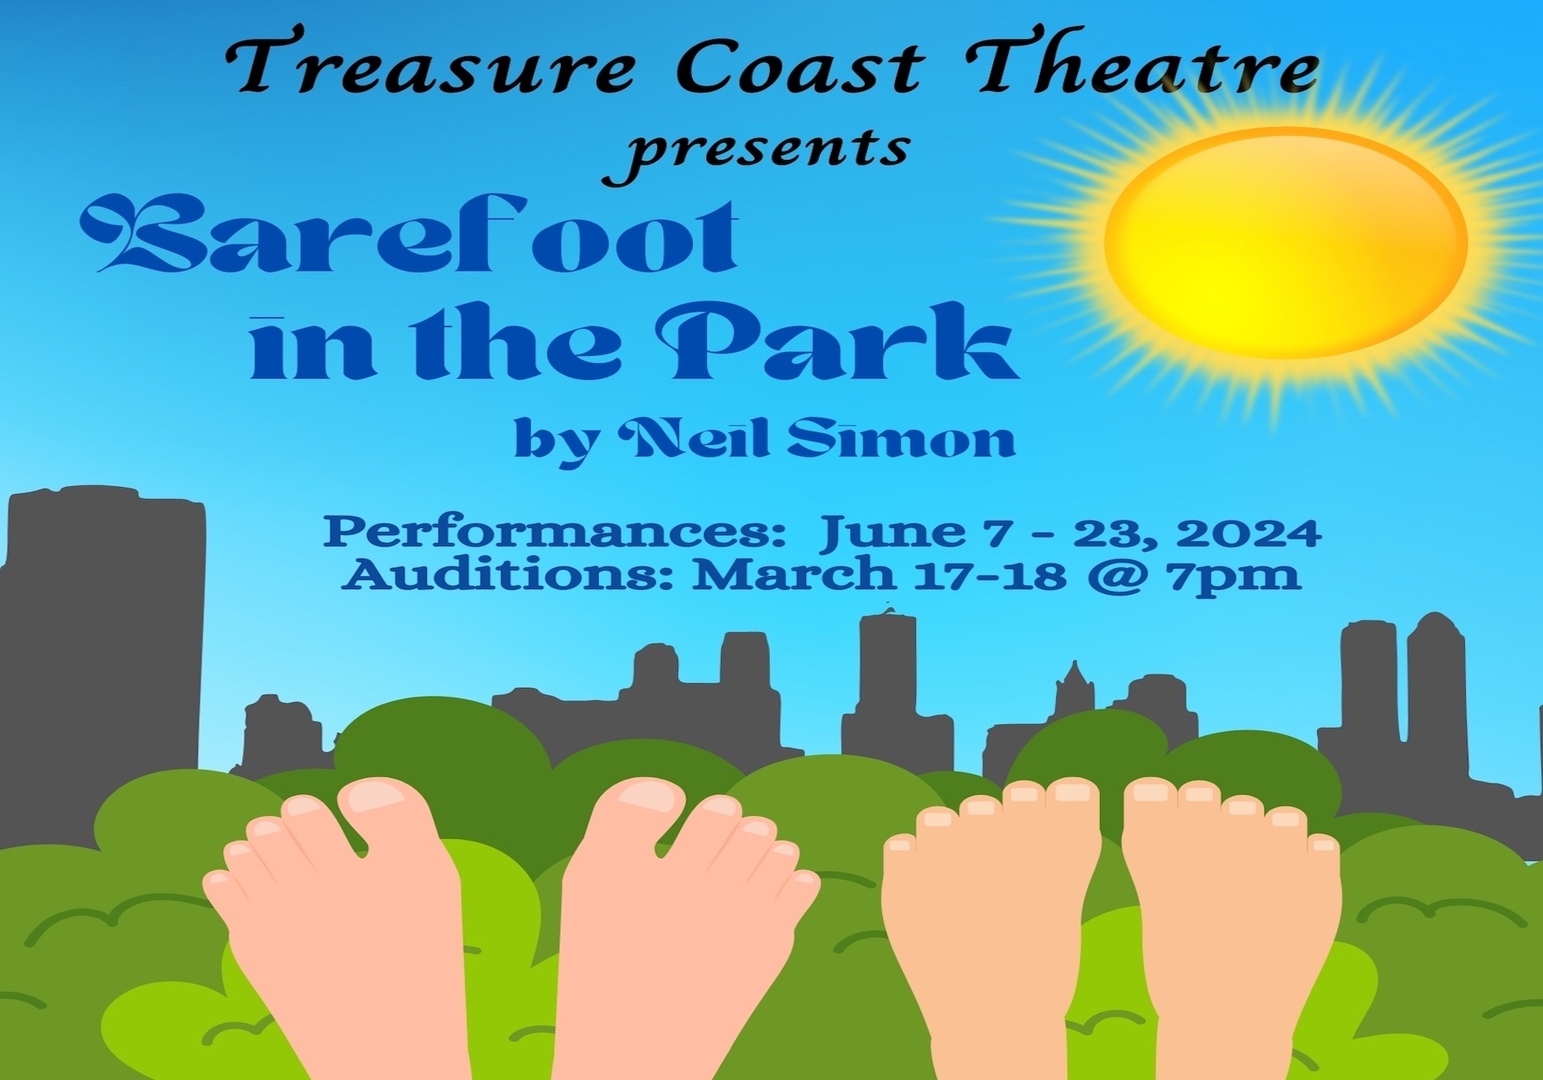 Treasure Coast Theatre holds auditions for the Neil Simon classic comedy, "Barefoot in the Park", Port St. Lucie, Florida, United States